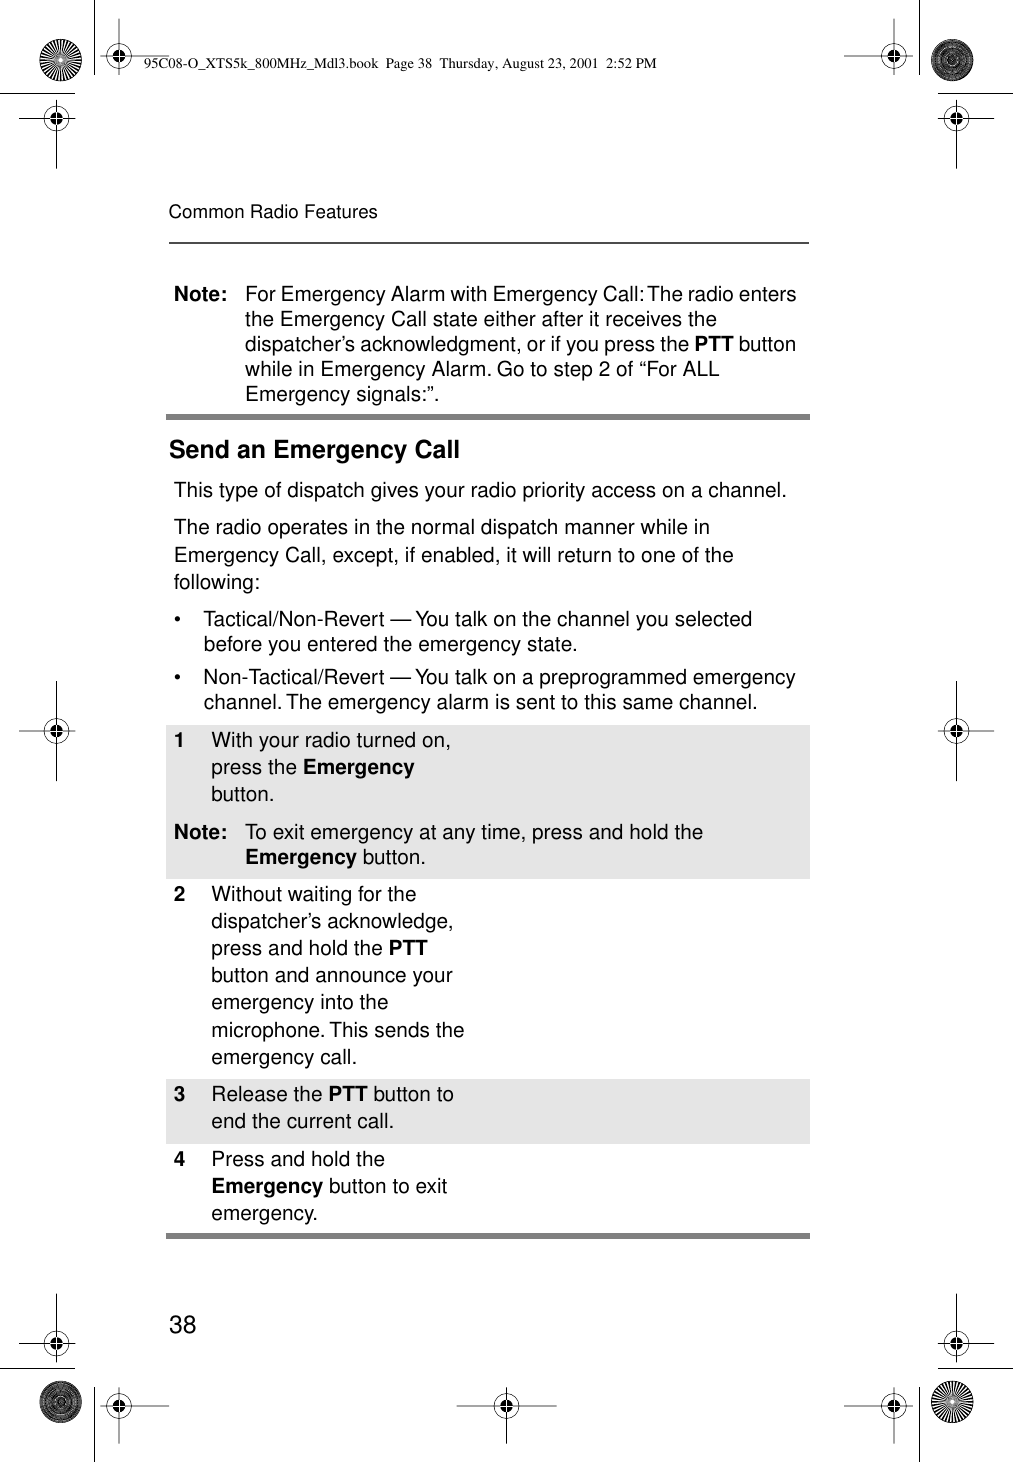 38Common Radio FeaturesSend an Emergency CallNote: For Emergency Alarm with Emergency Call: The radio enters the Emergency Call state either after it receives the dispatcher’s acknowledgment, or if you press the PTT button while in Emergency Alarm. Go to step 2 of “For ALL Emergency signals:”.This type of dispatch gives your radio priority access on a channel.The radio operates in the normal dispatch manner while in Emergency Call, except, if enabled, it will return to one of the following:• Tactical/Non-Revert — You talk on the channel you selected before you entered the emergency state.• Non-Tactical/Revert — You talk on a preprogrammed emergency channel. The emergency alarm is sent to this same channel.1With your radio turned on, press the Emergency button.Note: To exit emergency at any time, press and hold the Emergency button.2Without waiting for the dispatcher’s acknowledge, press and hold the PTT button and announce your emergency into the microphone. This sends the emergency call.3Release the PTT button to end the current call. 4Press and hold the Emergency button to exit emergency. 95C08-O_XTS5k_800MHz_Mdl3.book  Page 38  Thursday, August 23, 2001  2:52 PM